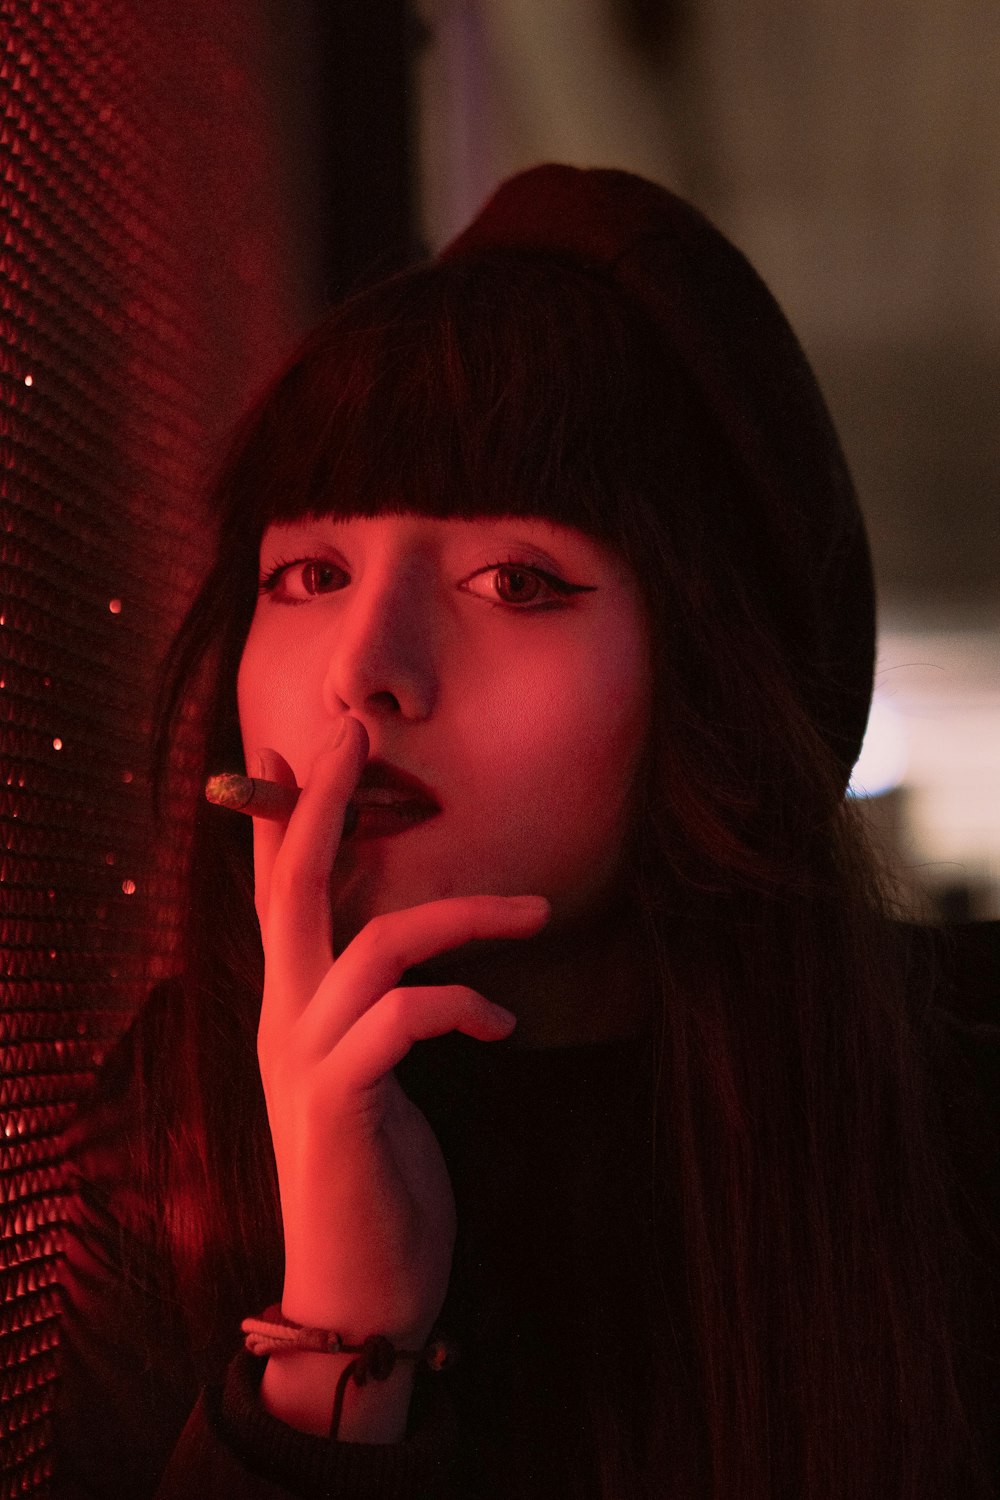 a woman smoking a cigarette in a dark room